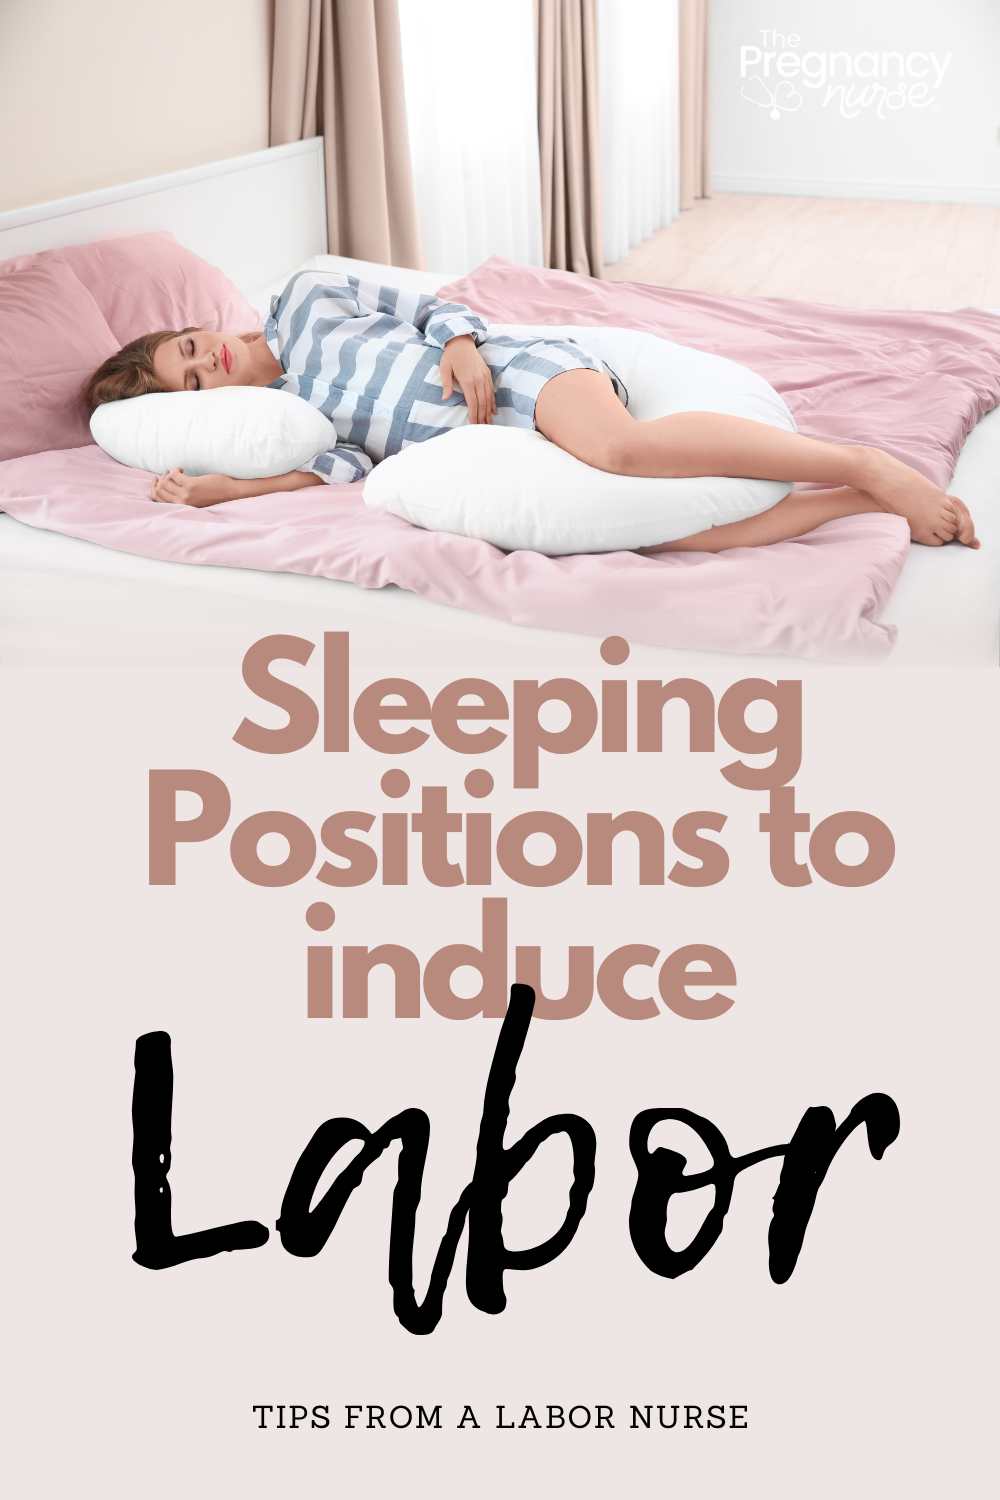 Discover the Sims position for a more comfortable sleep during your third trimester and how it can encourage your baby to turn into a good position for delivery. Get ready to ease into labor!